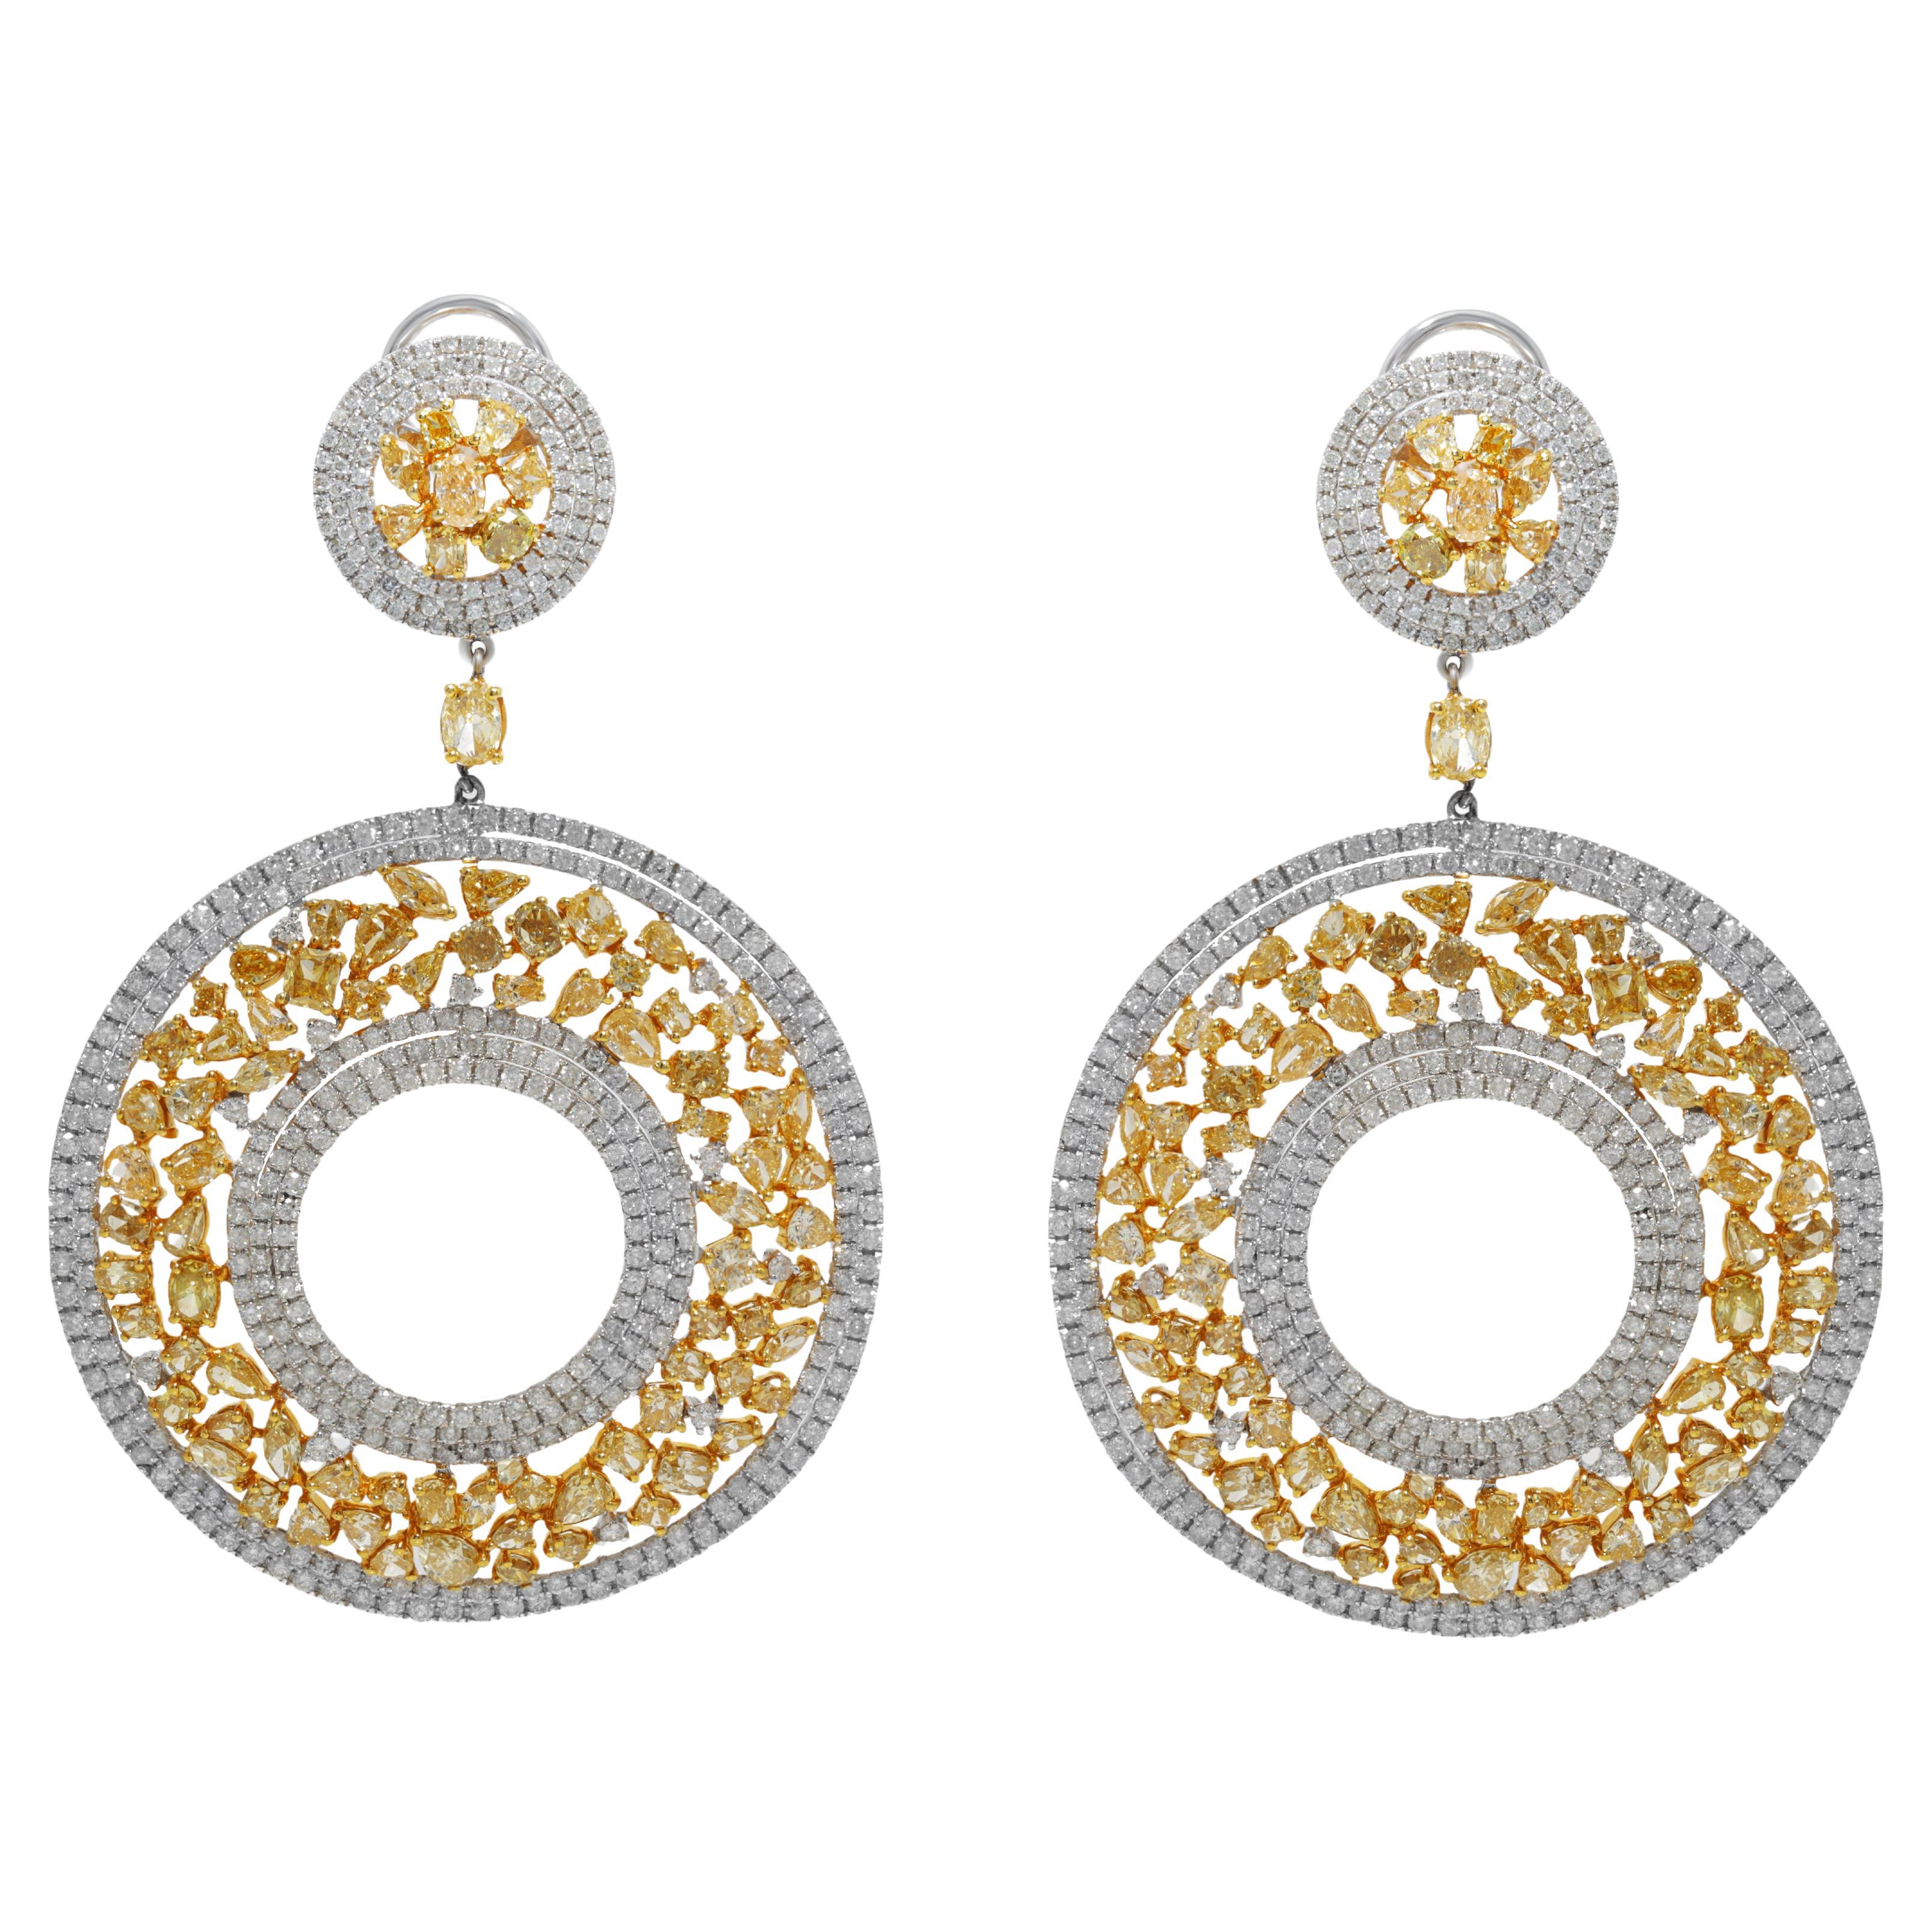 Diana M.18kt White and Yellow Gold, features 33.86 cts of Fancy Yellow and White For Sale